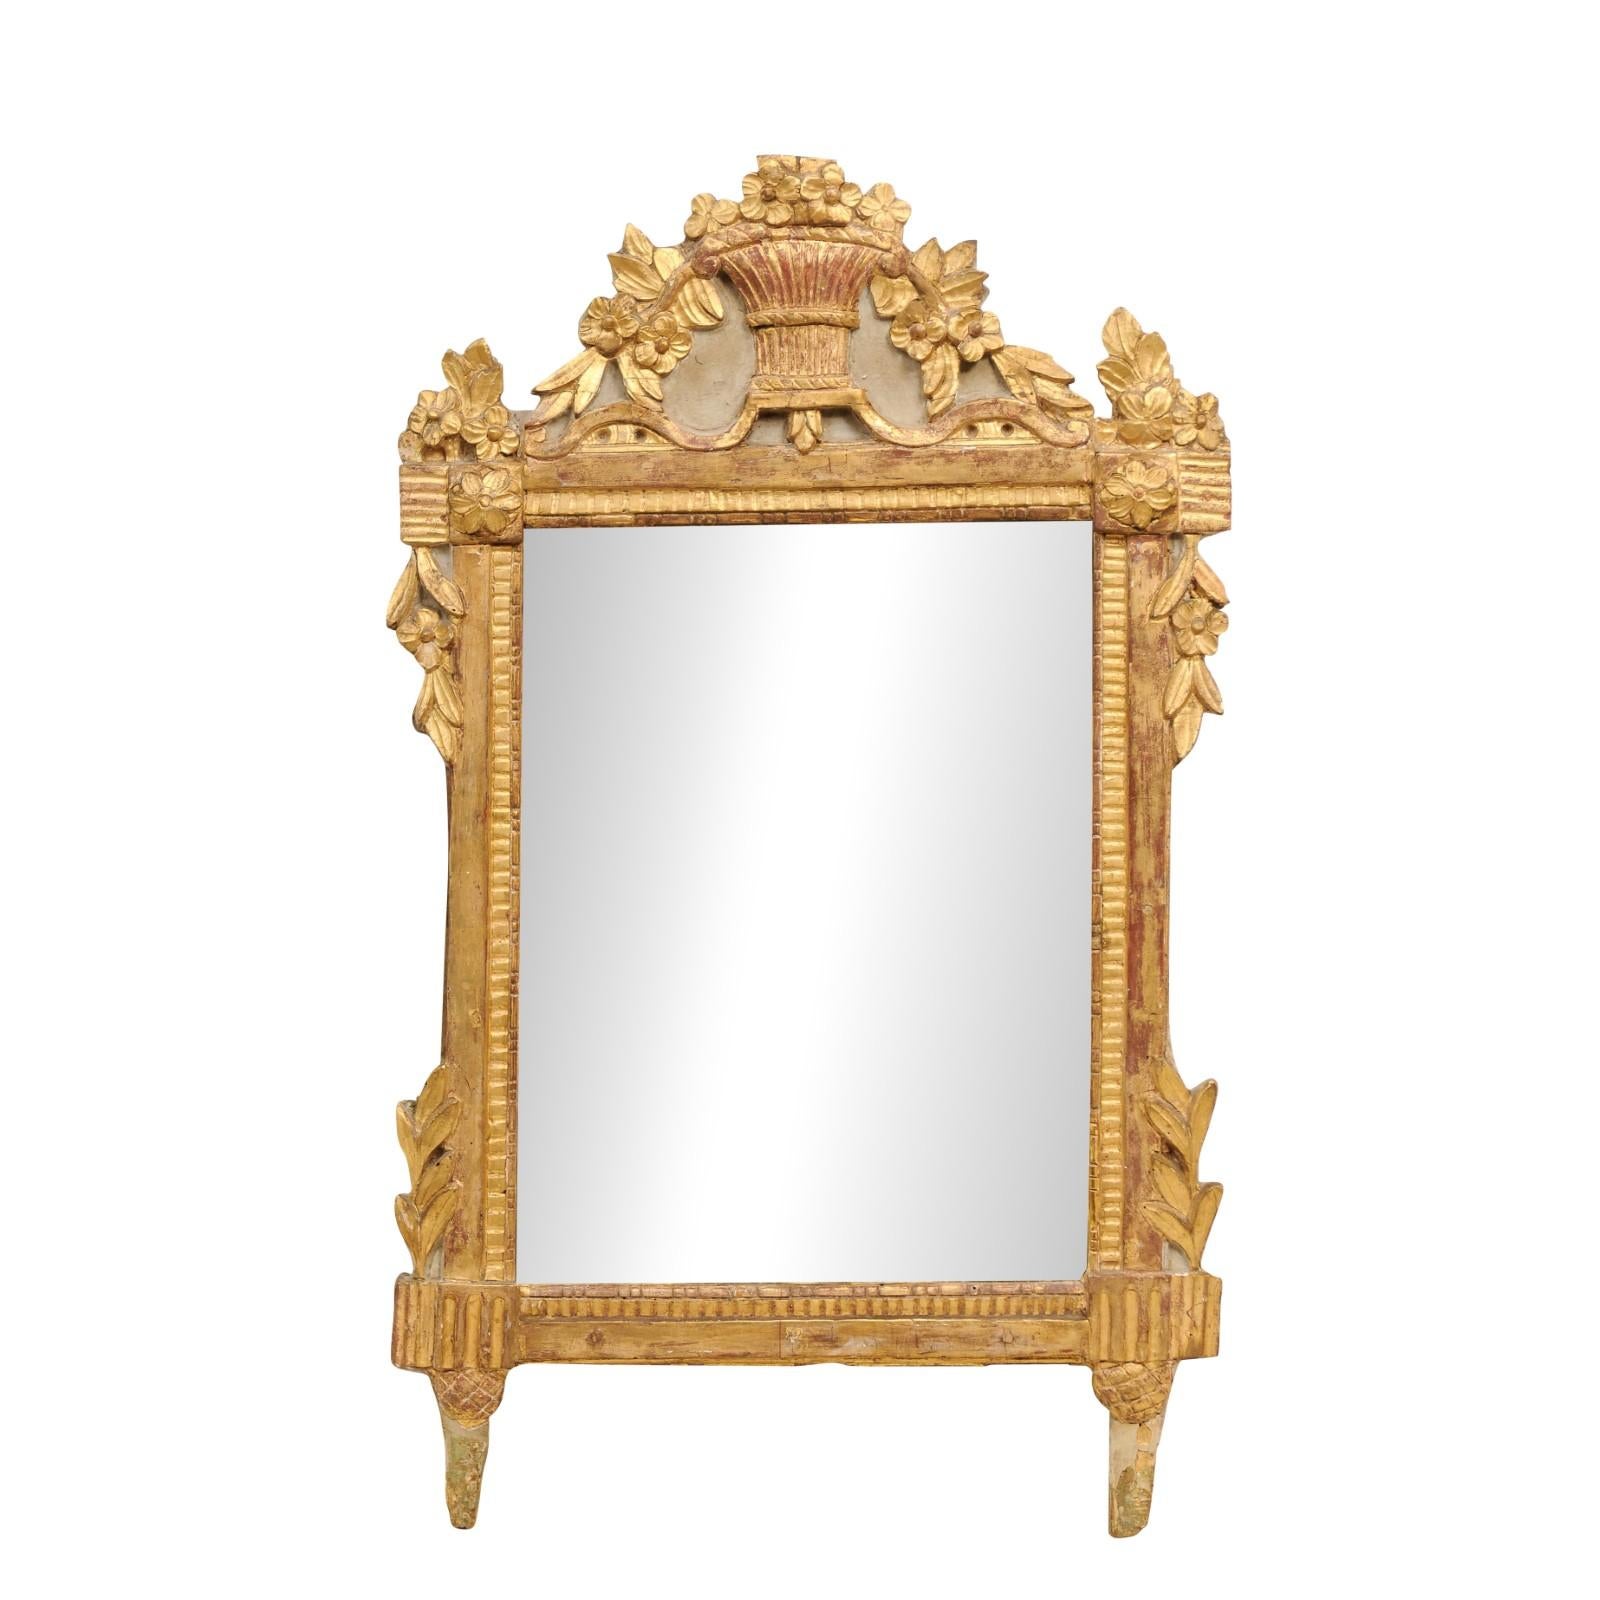 A French Louis XVI period giltwood mirror from the 18th century with carved crest depicting a bouquet of flowers falling from a wicker basket, carved foliage and old mirror plate. This stunning French Louis XVI period giltwood mirror from the 18th